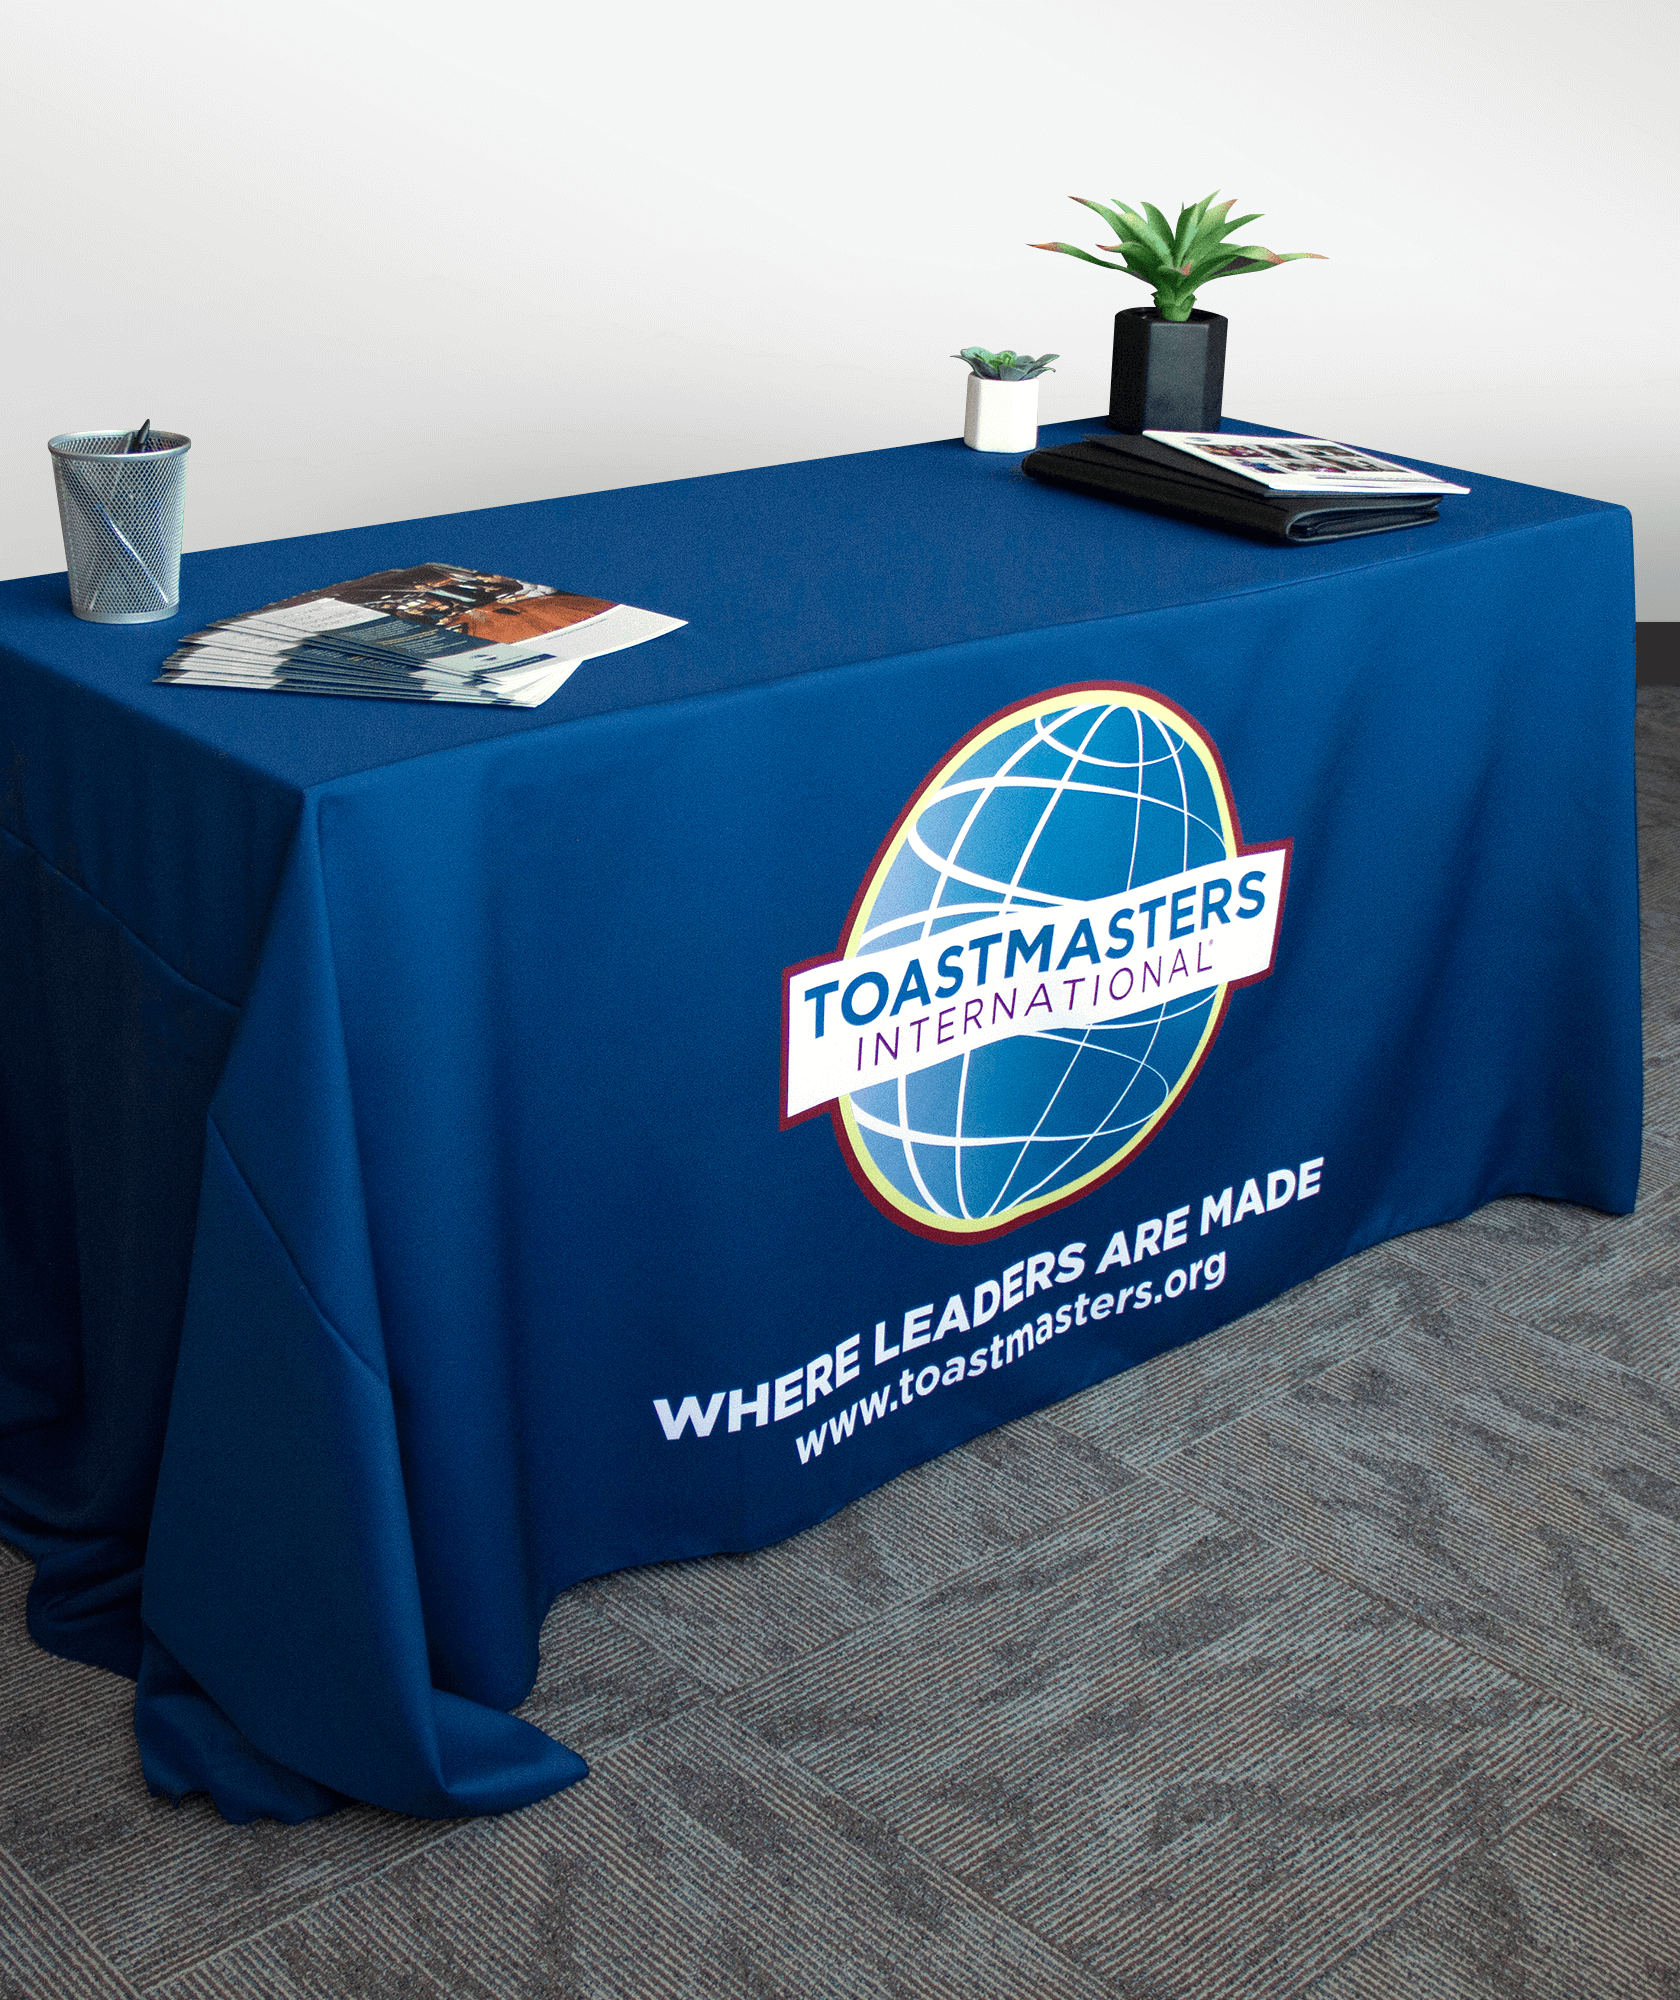 Navy tablecloth with color logo, tagline and website